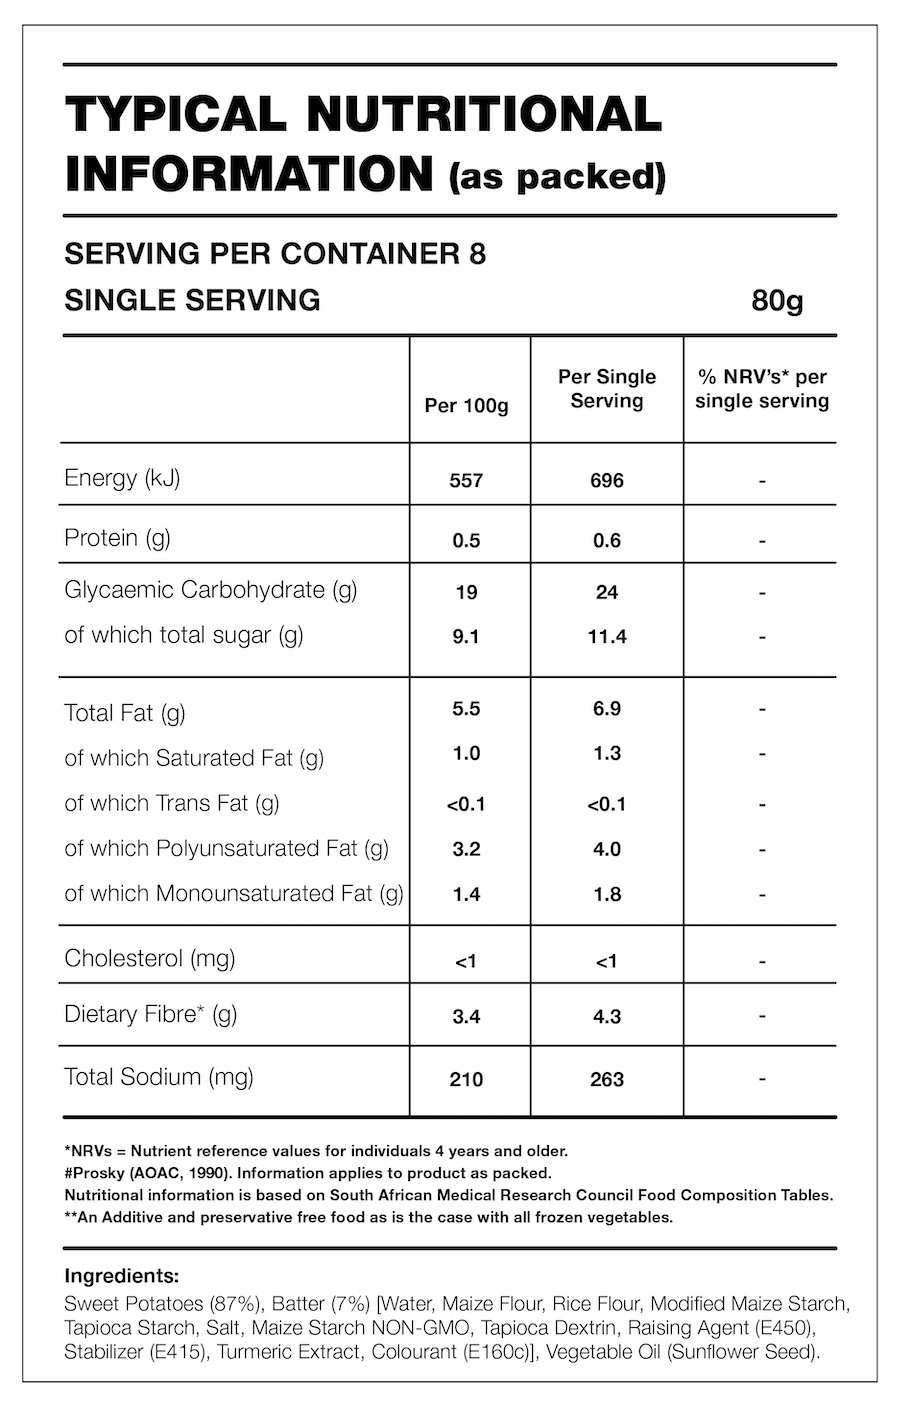 Table with Nutrition Information for the product